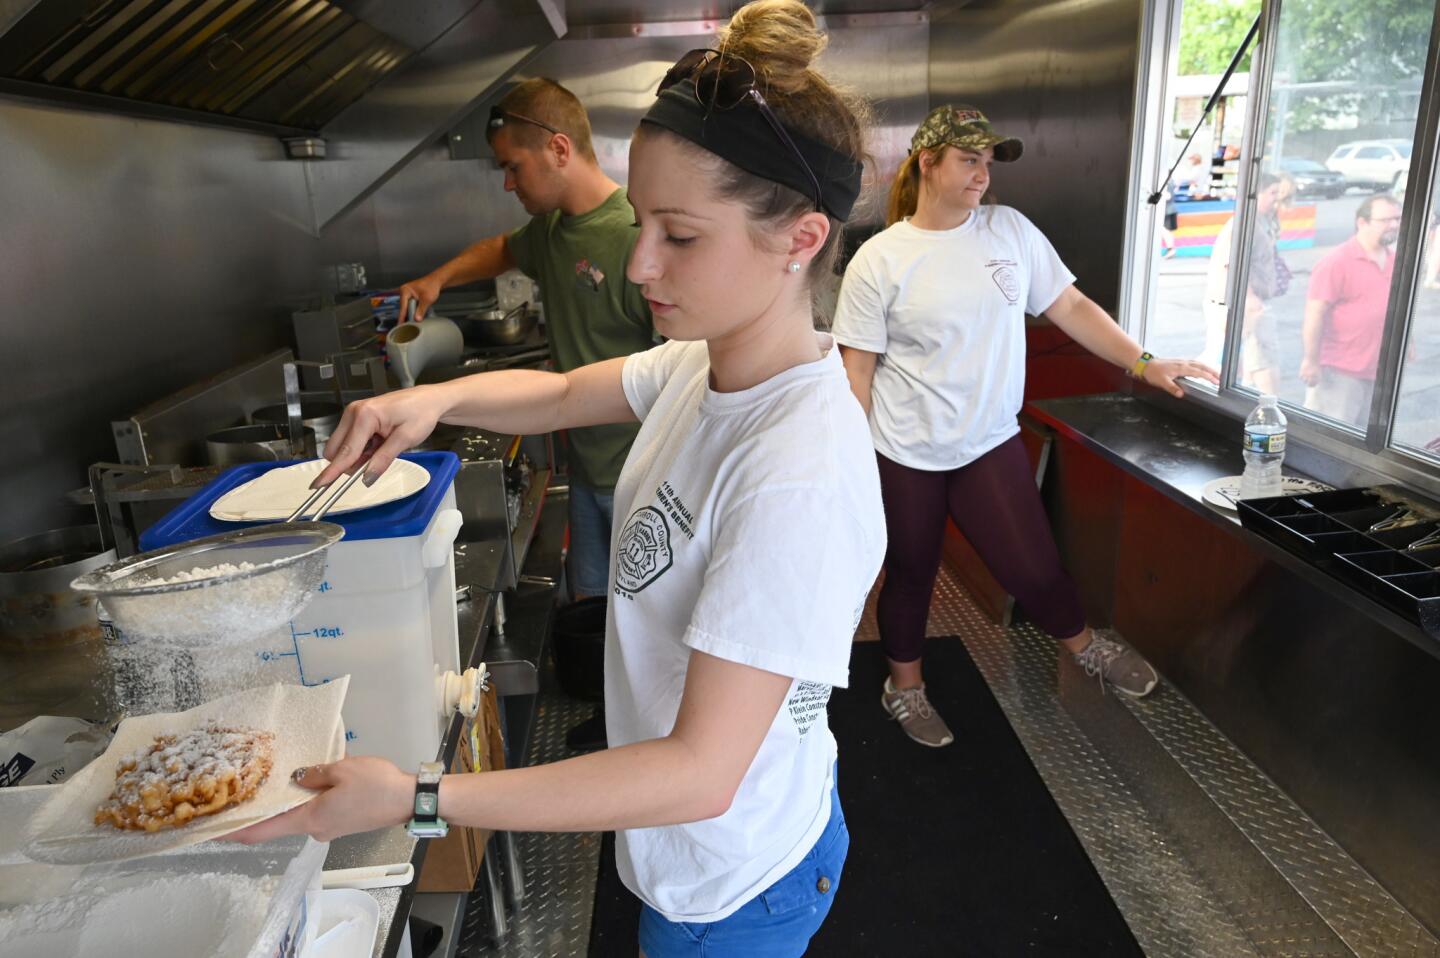 Kayla Wagerman, center, powders a funnel cake as she joined by fellow volunteers Kendall Bowers, left, and Berna Blocher, serving food from a concessions truck during the carnival at the Harney Volunteer Fire Company on Tuesday, June 25.